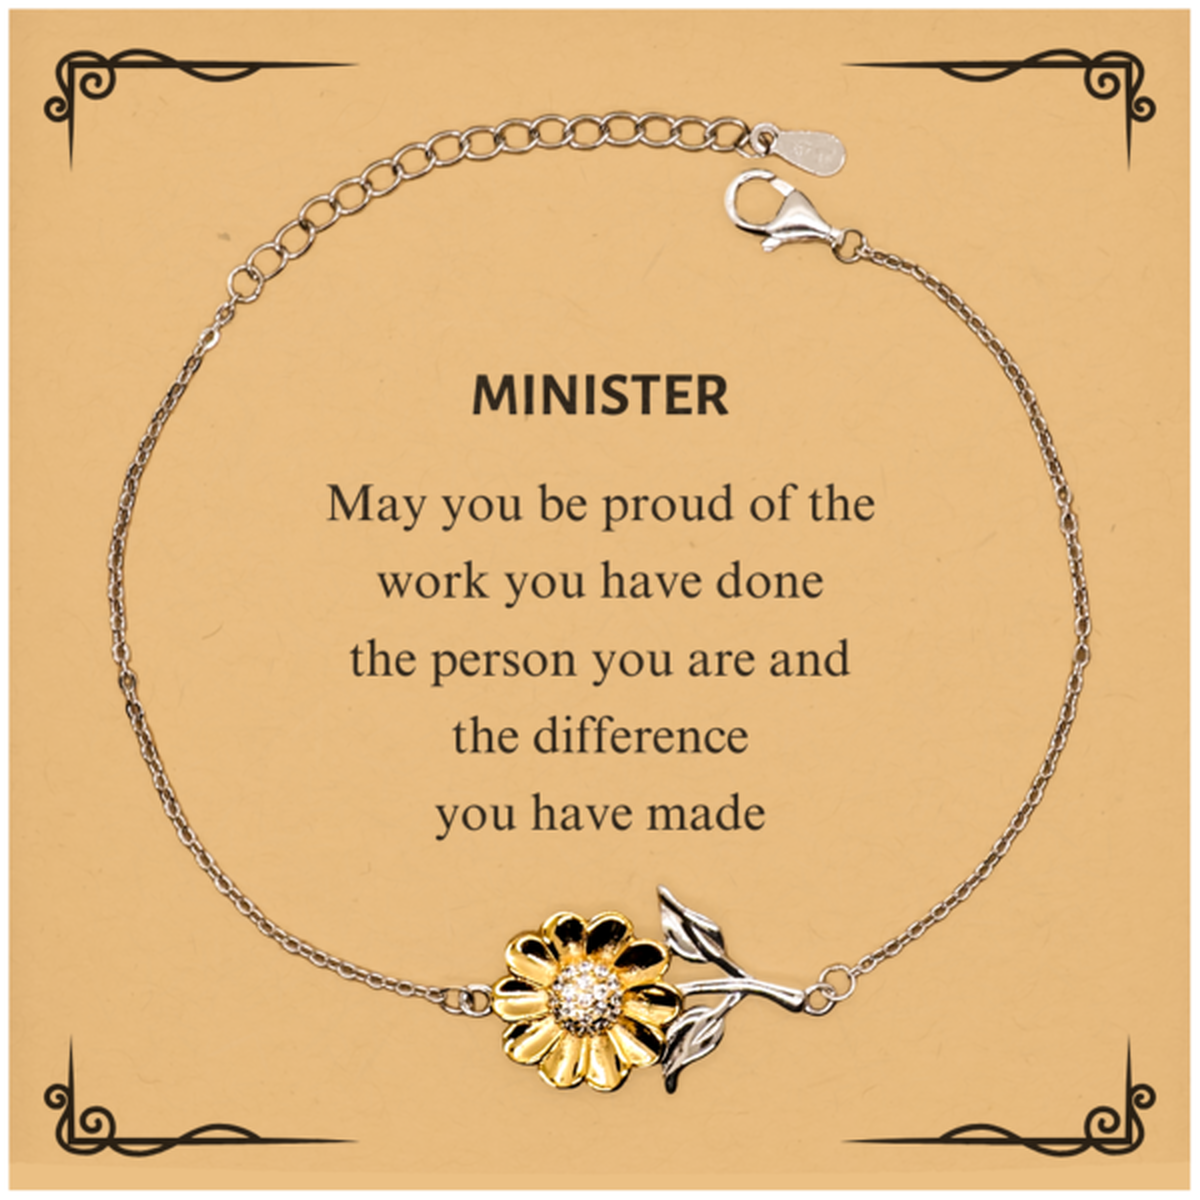 Minister May you be proud of the work you have done, Retirement Minister Sunflower Bracelet for Colleague Appreciation Gifts Amazing for Minister